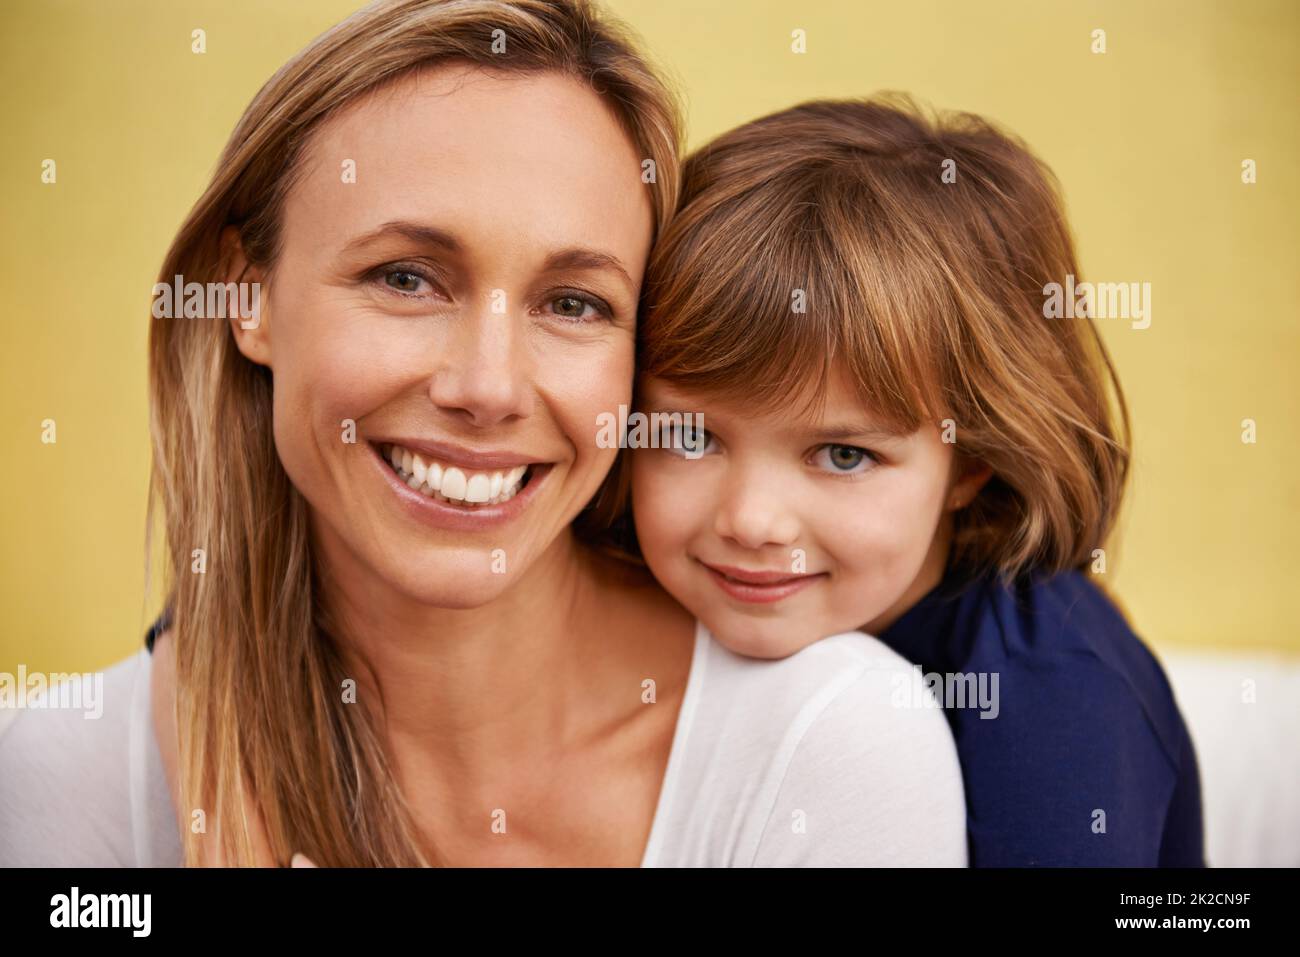 Mommy and me. Portrait of a loving mother and daughter at home. Stock Photo